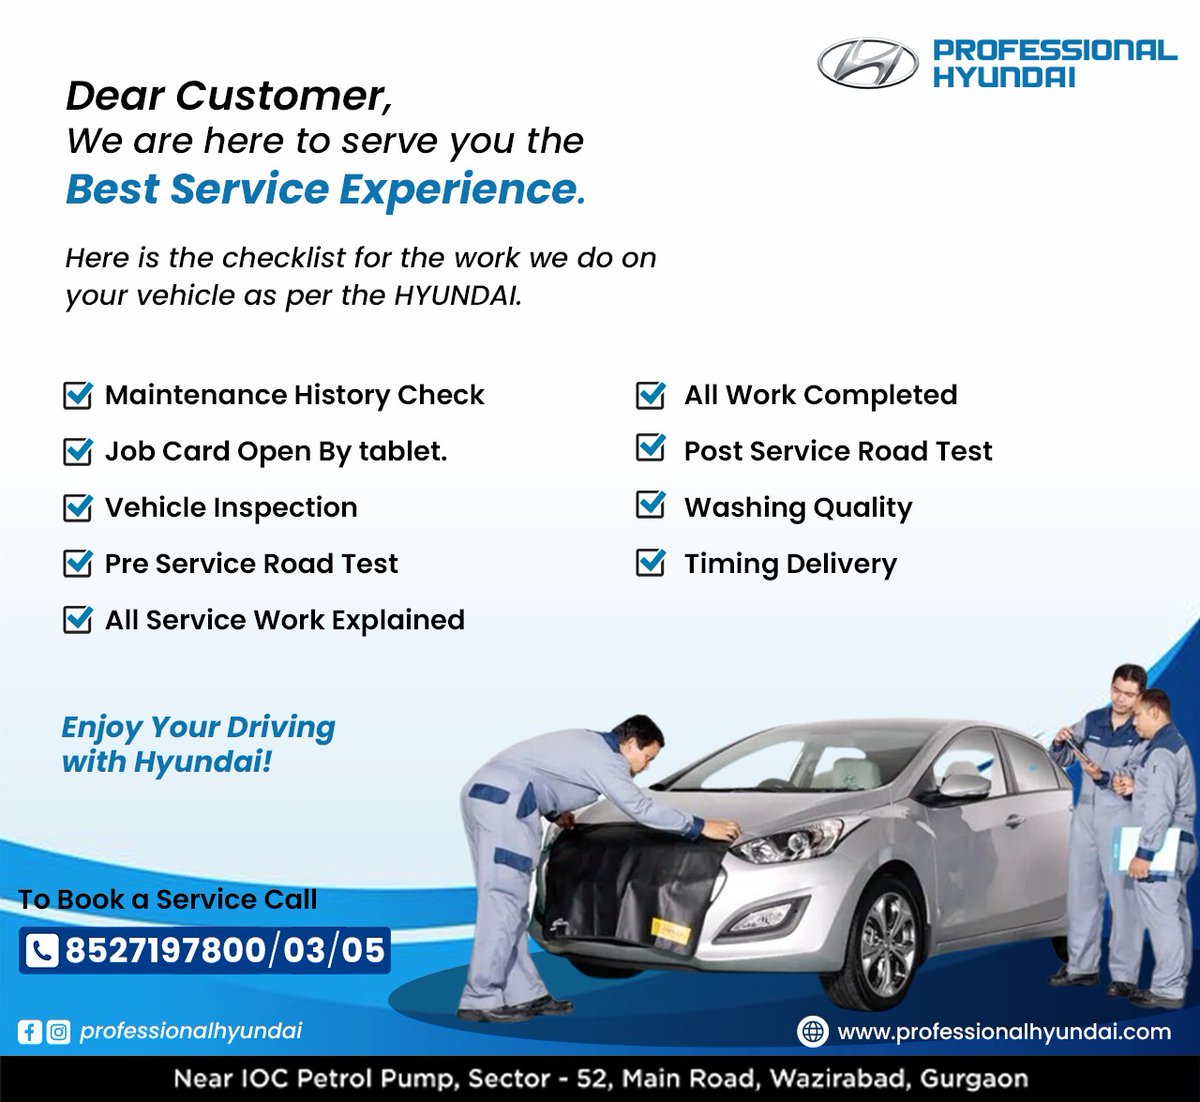 Dear Customer, We are here to serve you the Best Service Experience. Here is the checklist for the work we do on your vehicle as per the HYUNDAI. Book Your Car Service Now !! #HyundaiIndia #hyundaicares #carecare #AisiCareNowhere #HyundaiService #drywash #hyundaiservicecenter